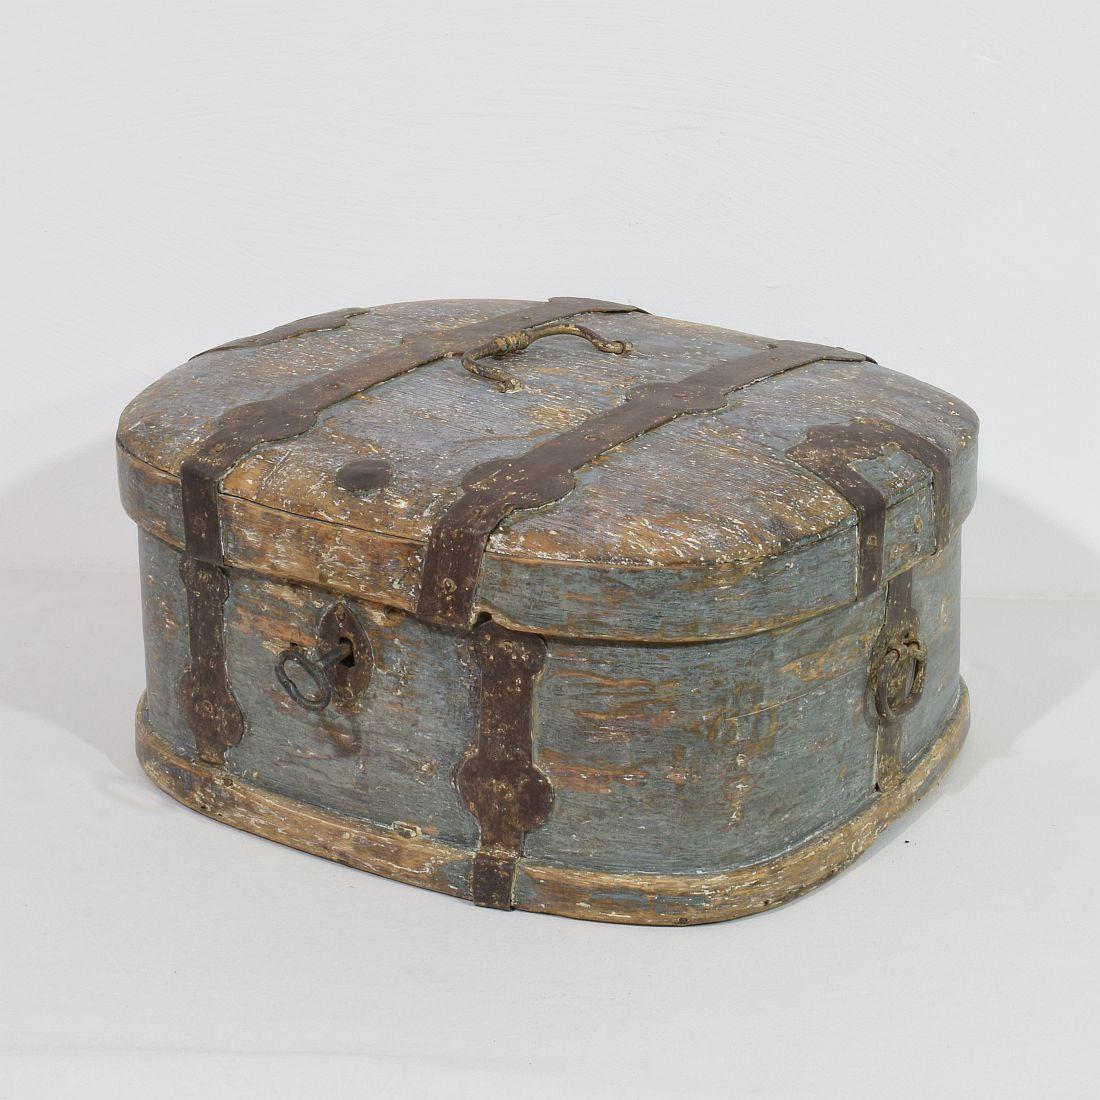 Rare and very beautiful Swedish travel box with stunning patina and hand forged iron details. Working lock and key.
Sweden, circa 1750-1800. Weathered, small losses and old repairs.